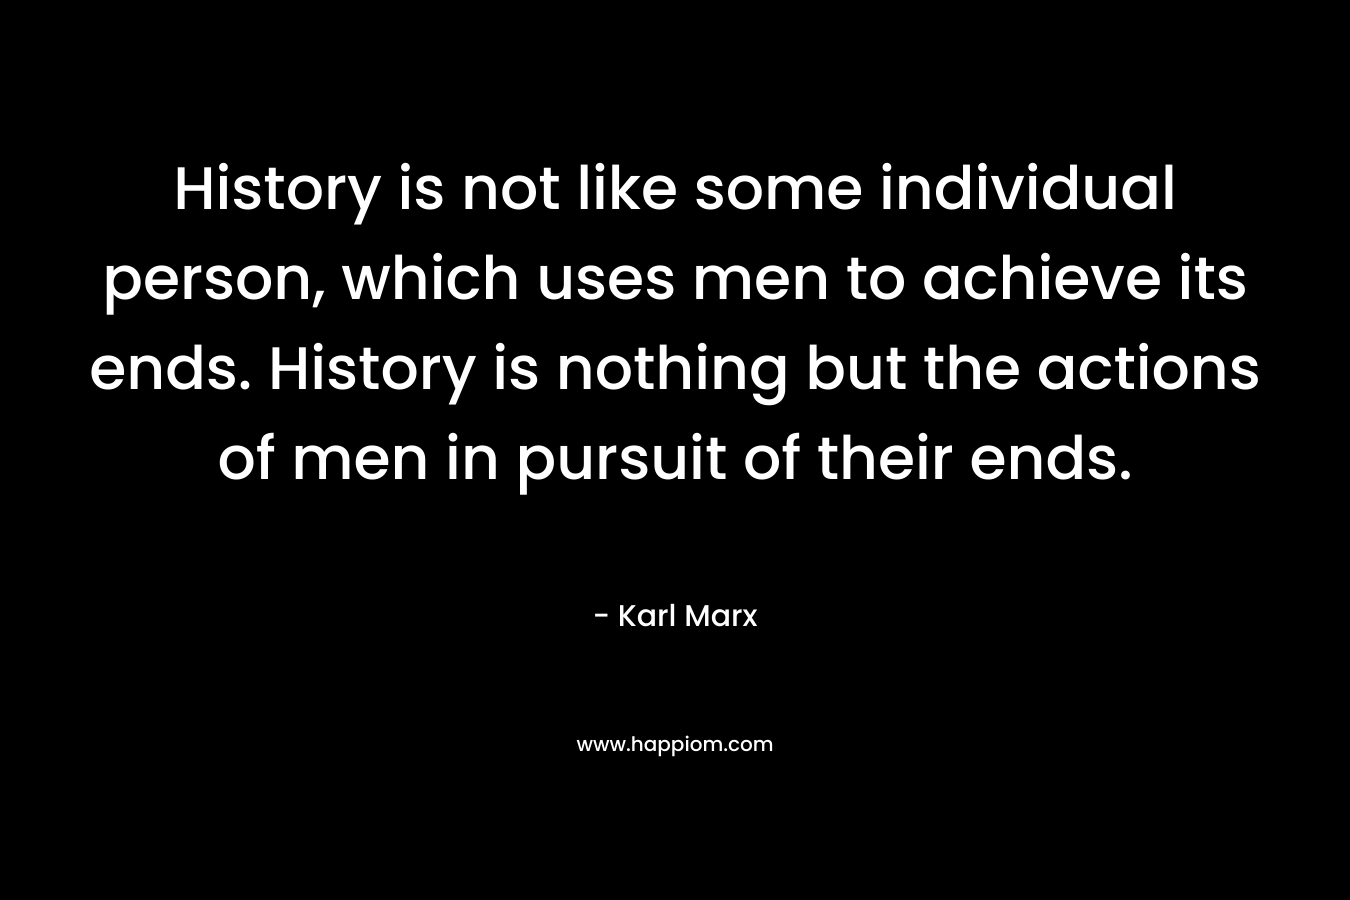 History is not like some individual person, which uses men to achieve its ends. History is nothing but the actions of men in pursuit of their ends.